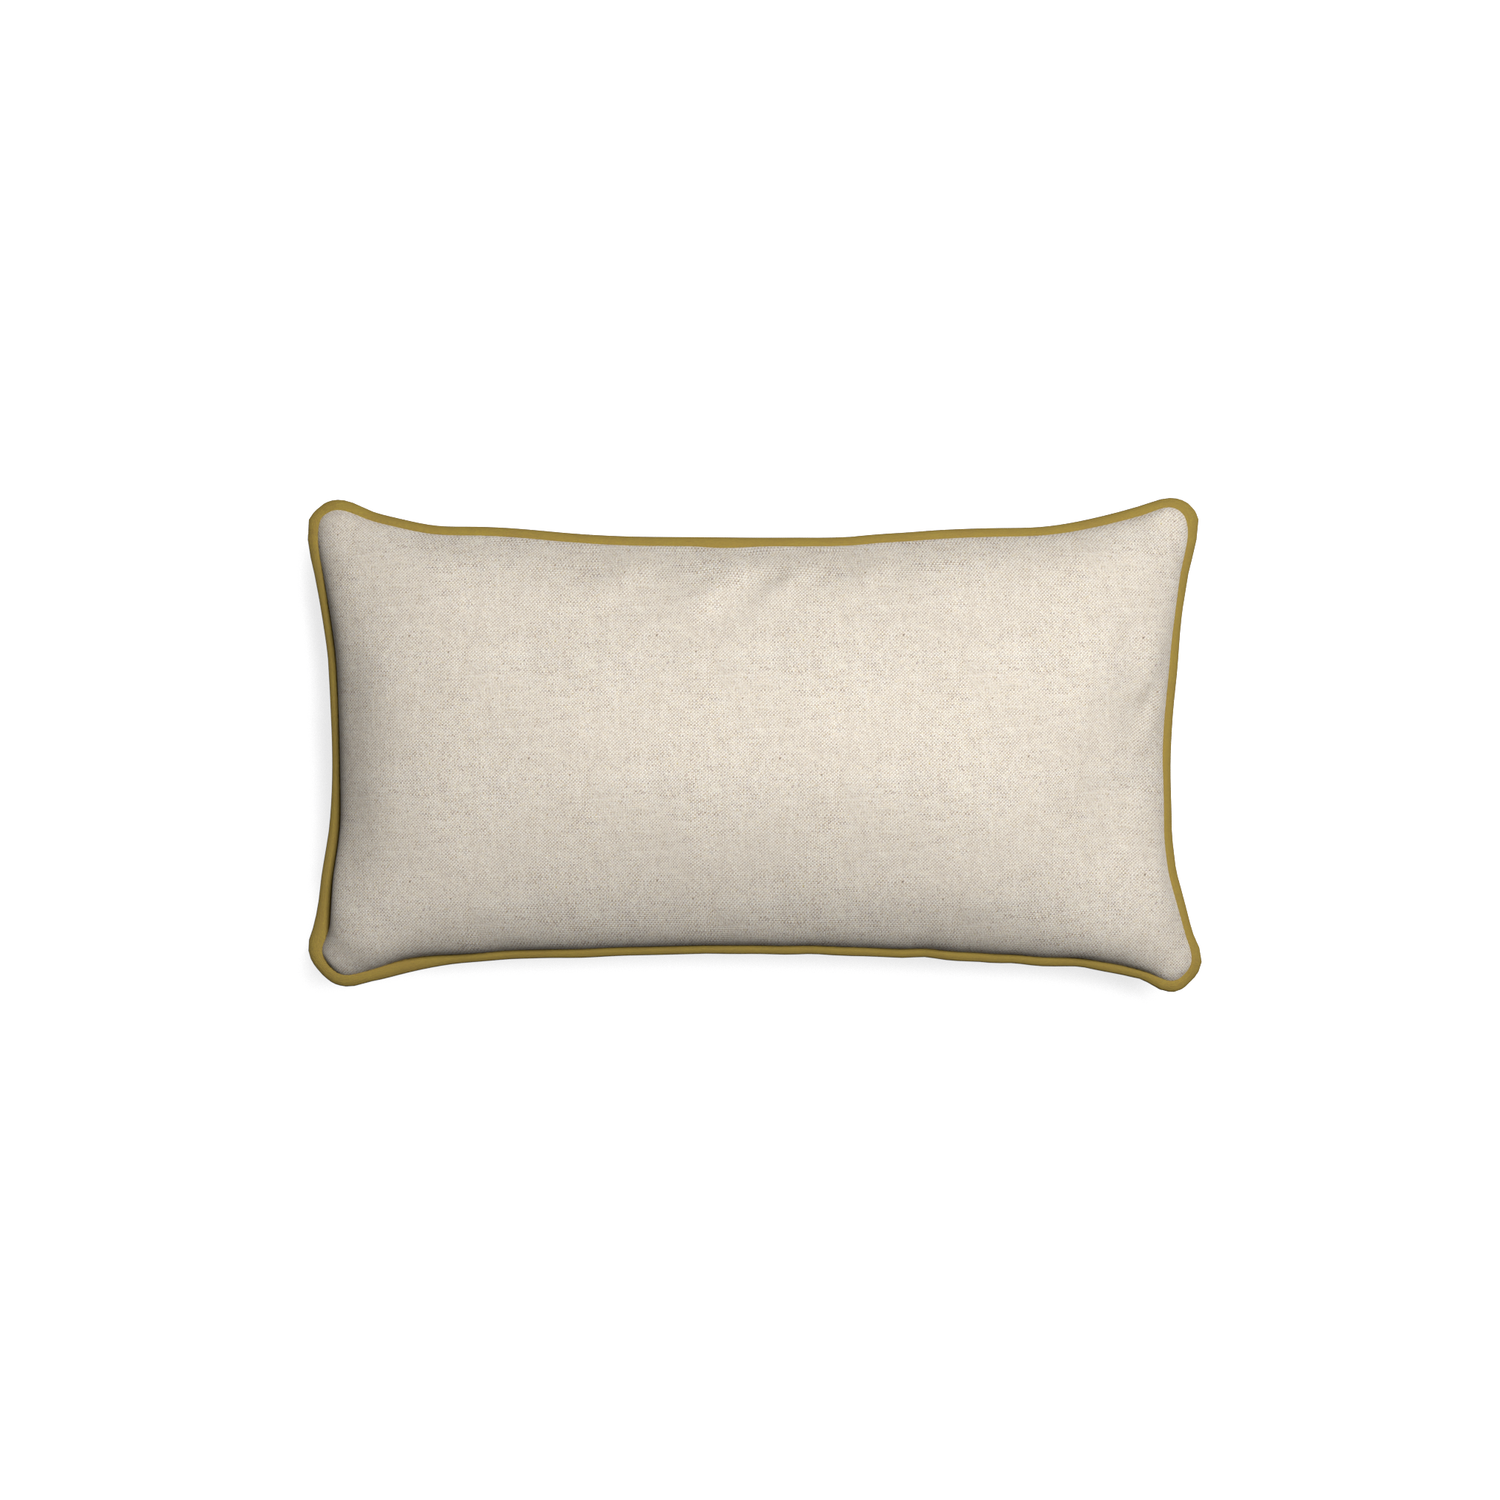 Petite-lumbar oat custom light brownpillow with c piping on white background